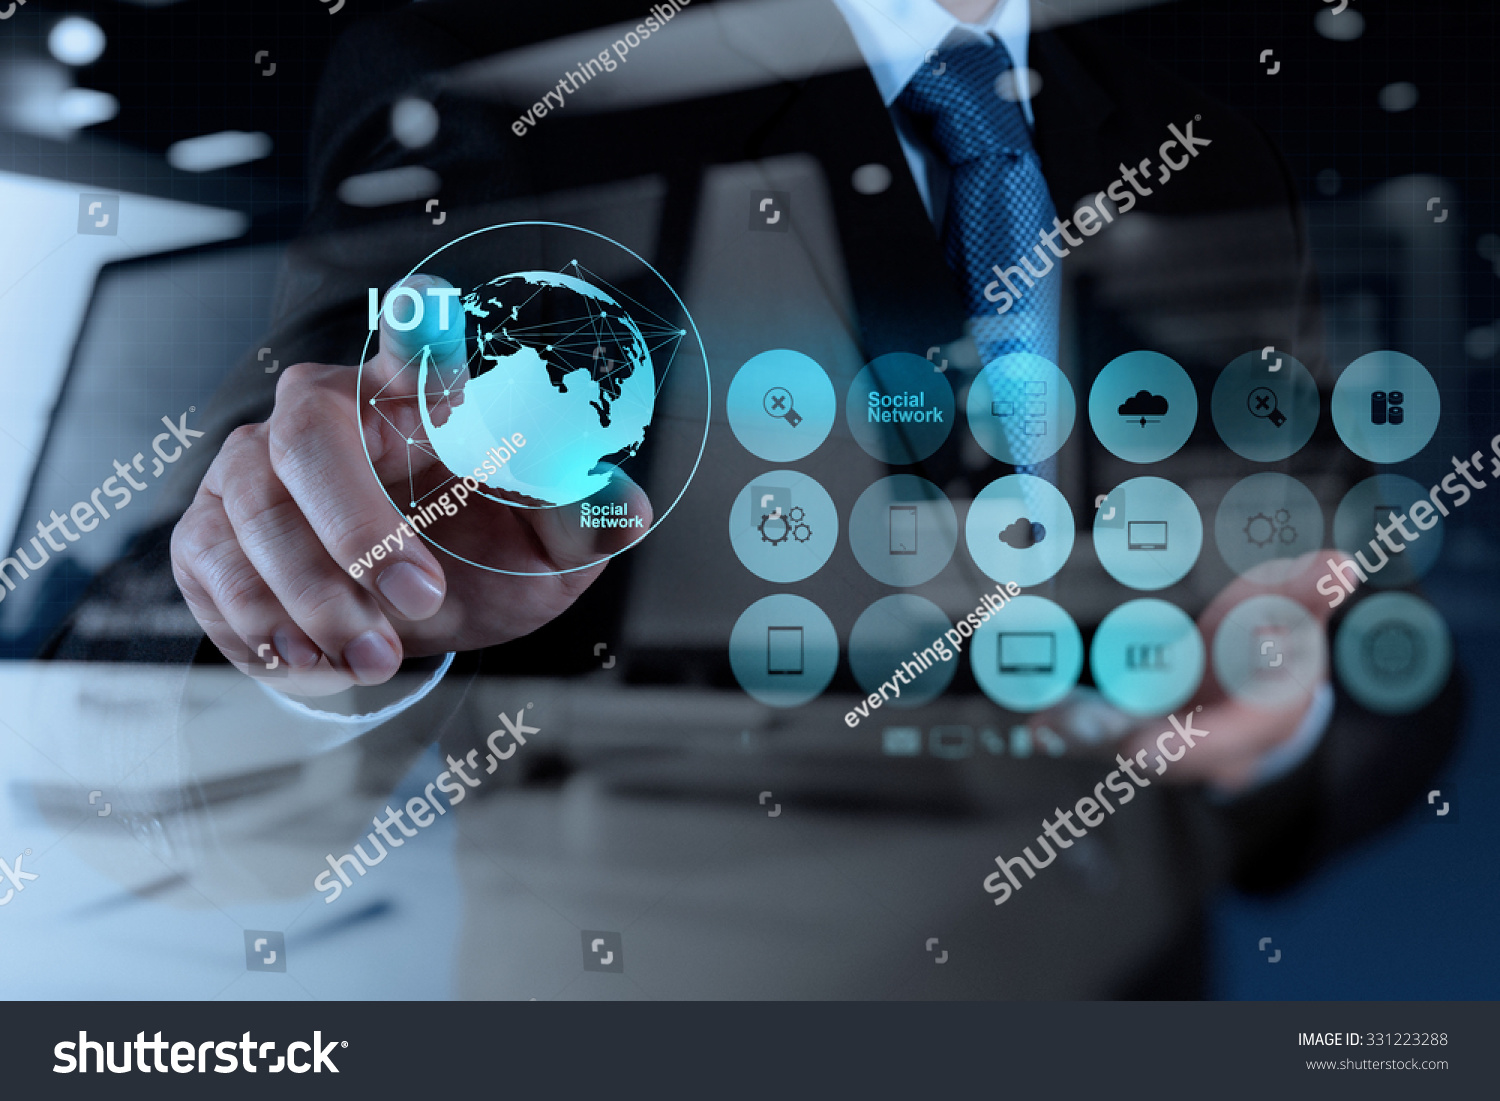 double exposure of hand showing Internet of things (IoT) word diagram as concept #331223288